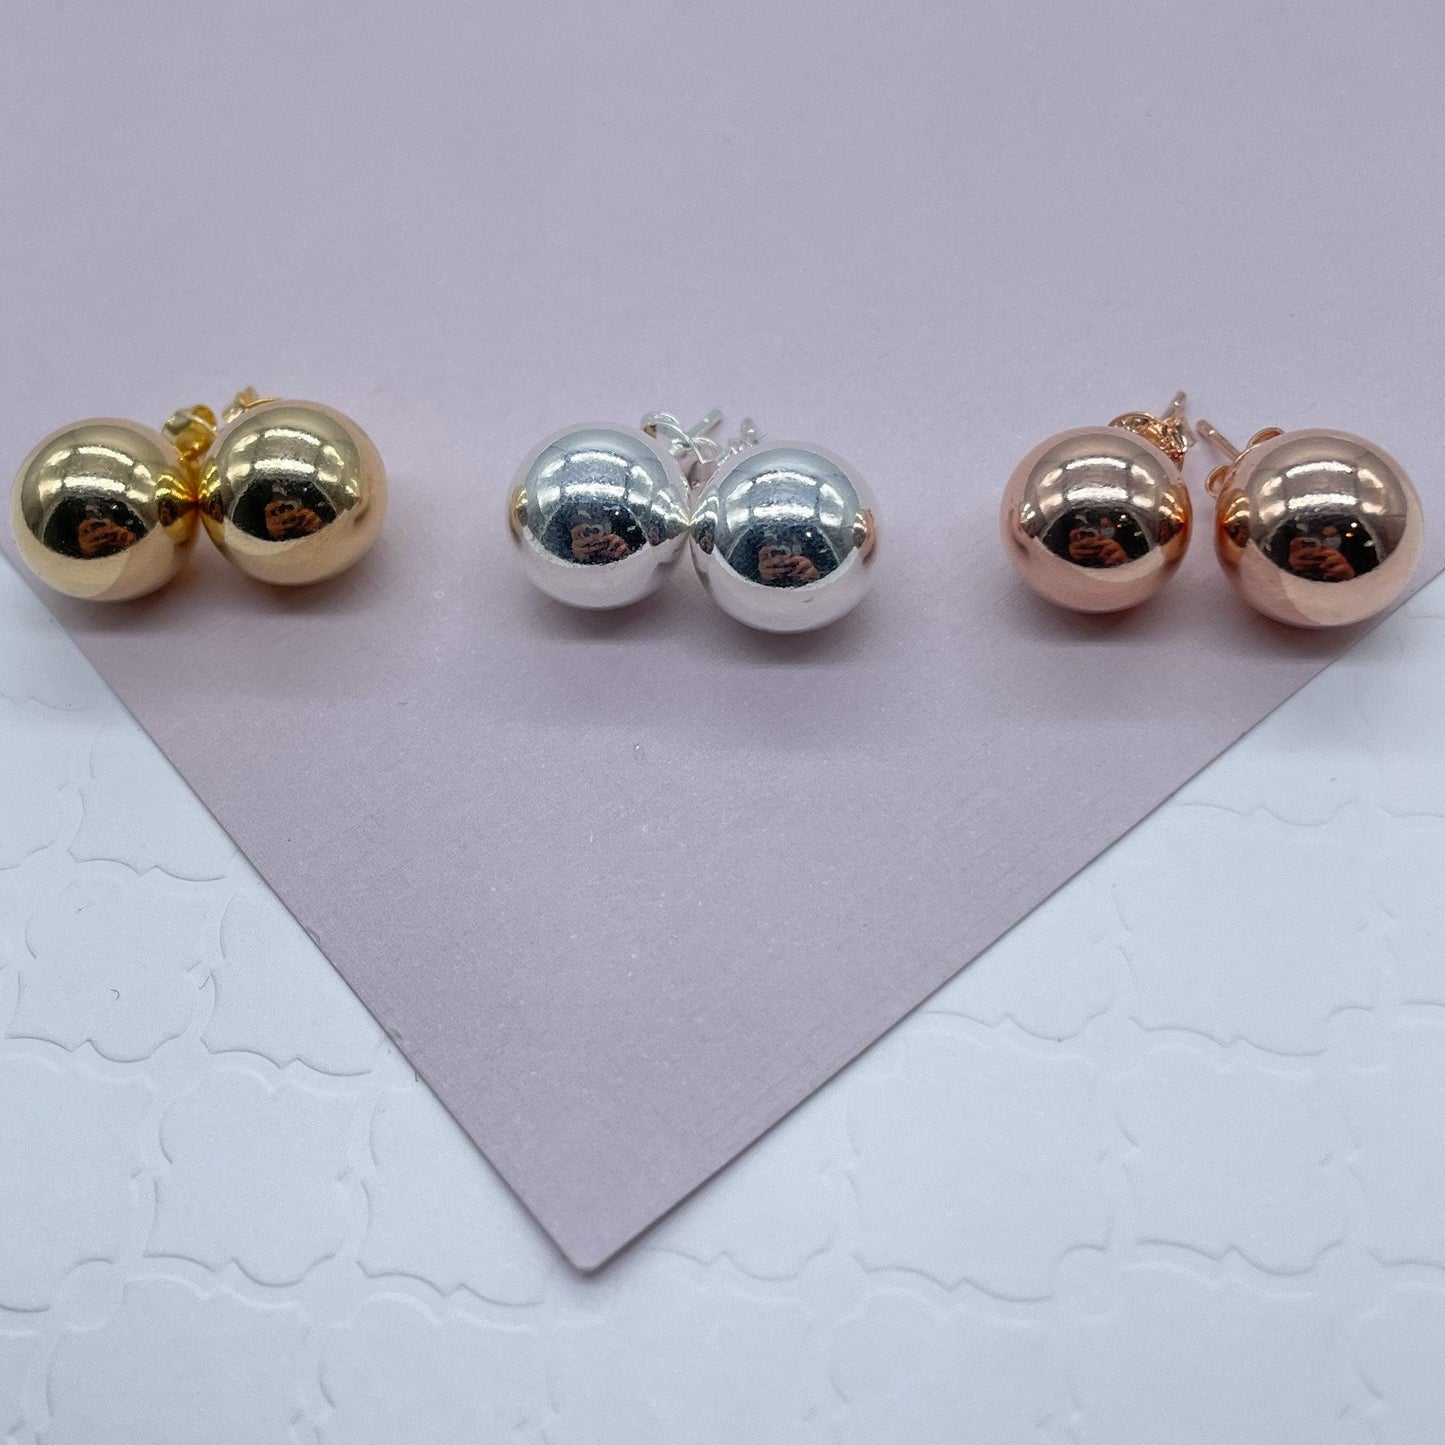 18k Gold Layered 14mm Ball Stud Earrings Available in Gold, Rose Gold and